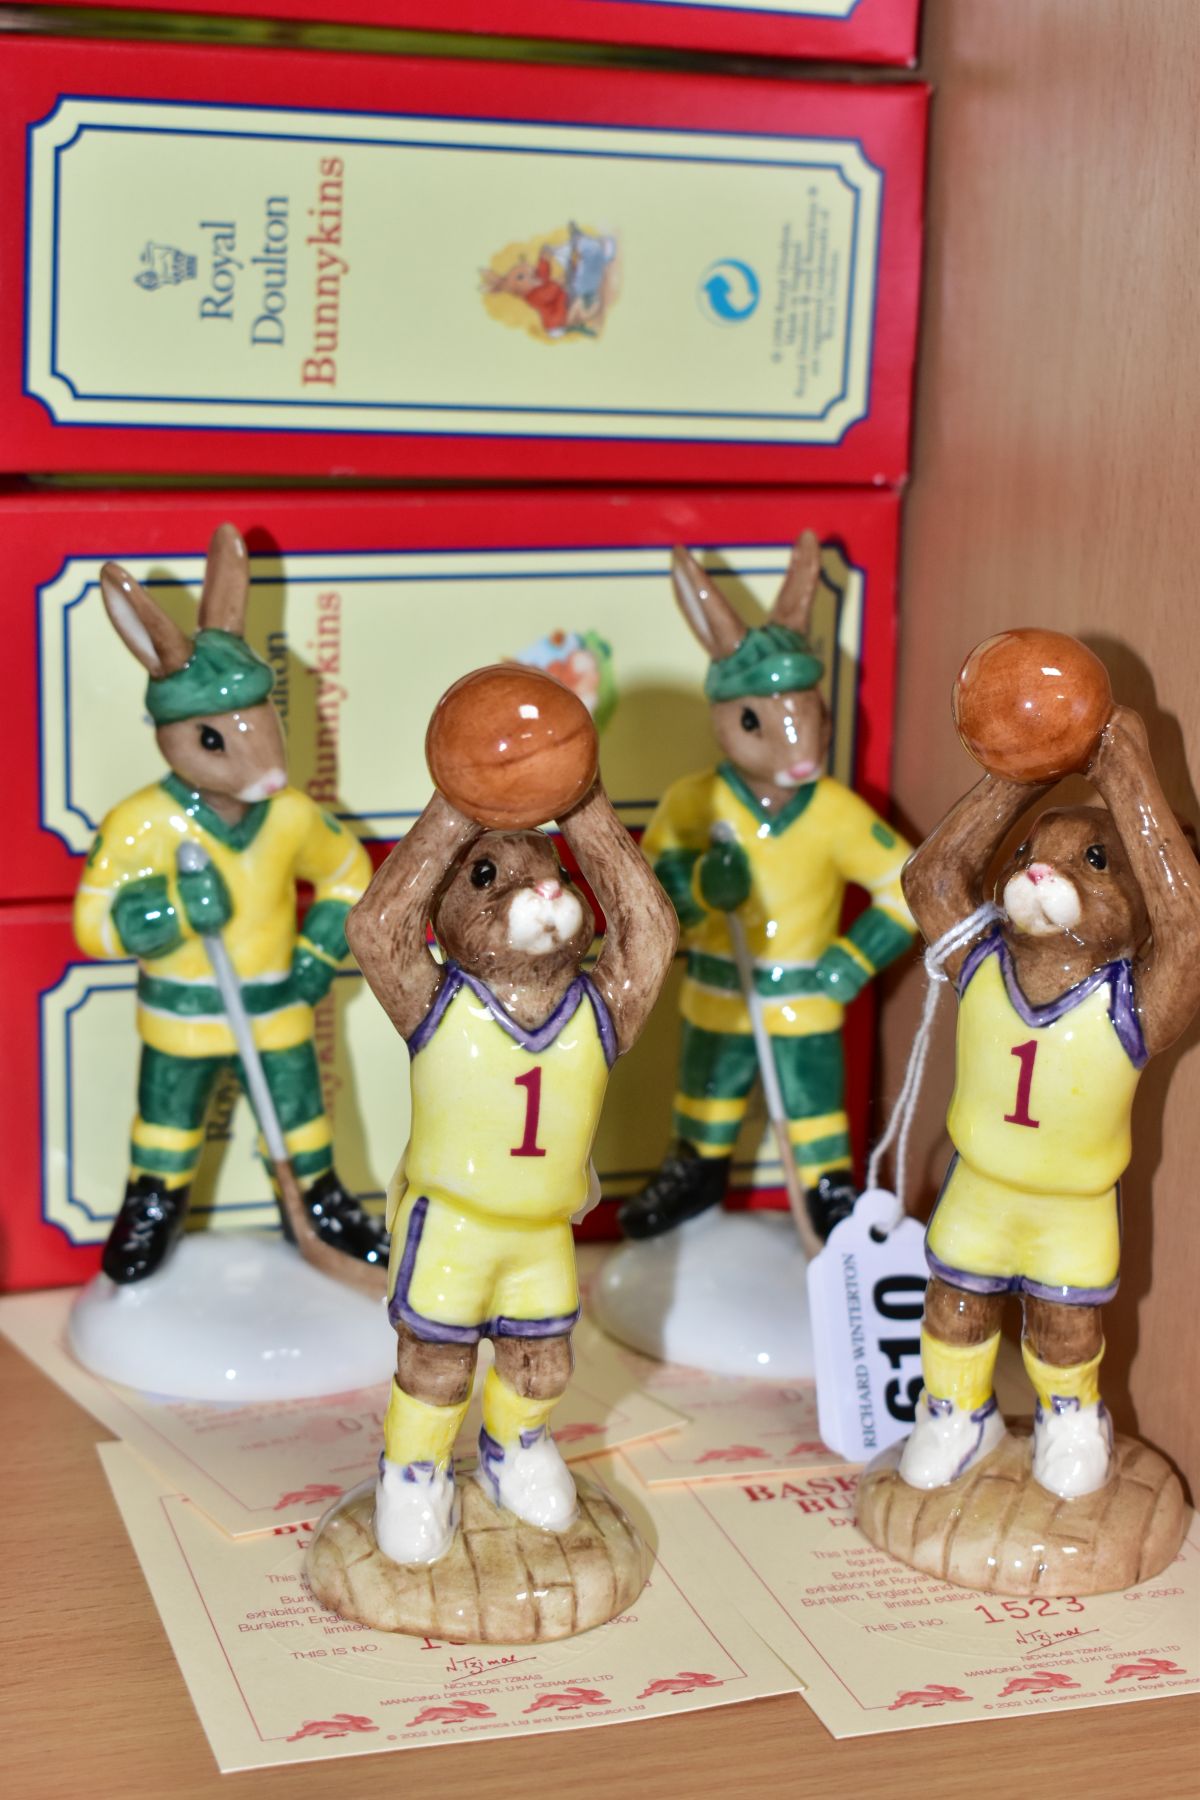 FOUR BOXED ROYAL DOULTON LIMITED EDITION BUNNYKINS FIGURES PRODUCED EXCLUSIVELY FOR U.K.I.